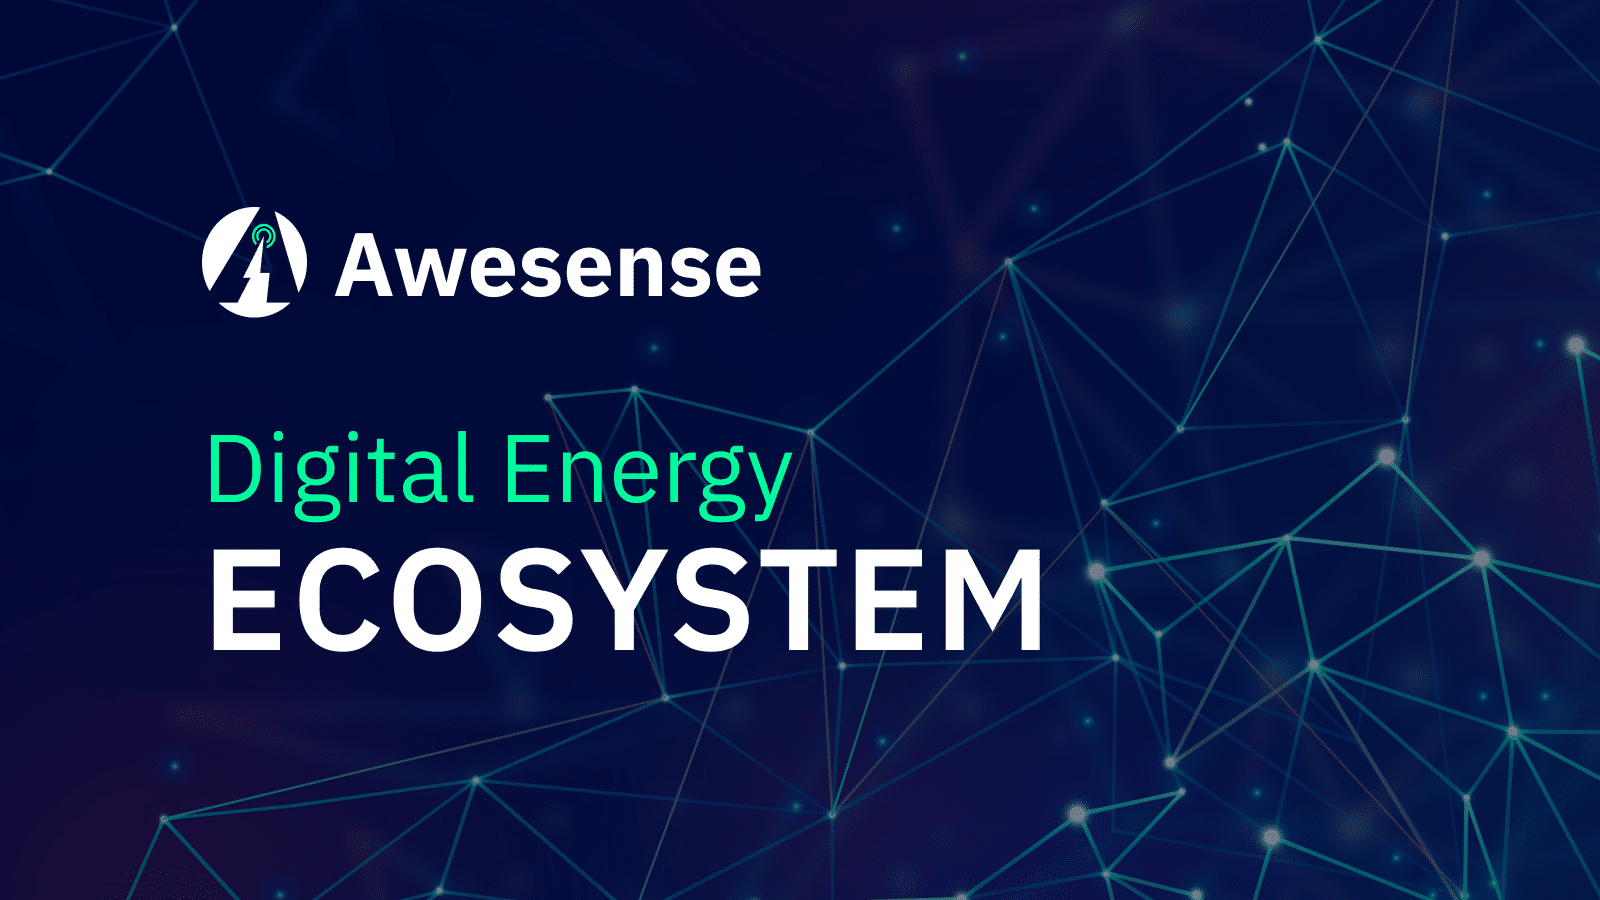 Awesense launches one-of-a-kind digital energy Ecosystem to empower development of clean energy solutions